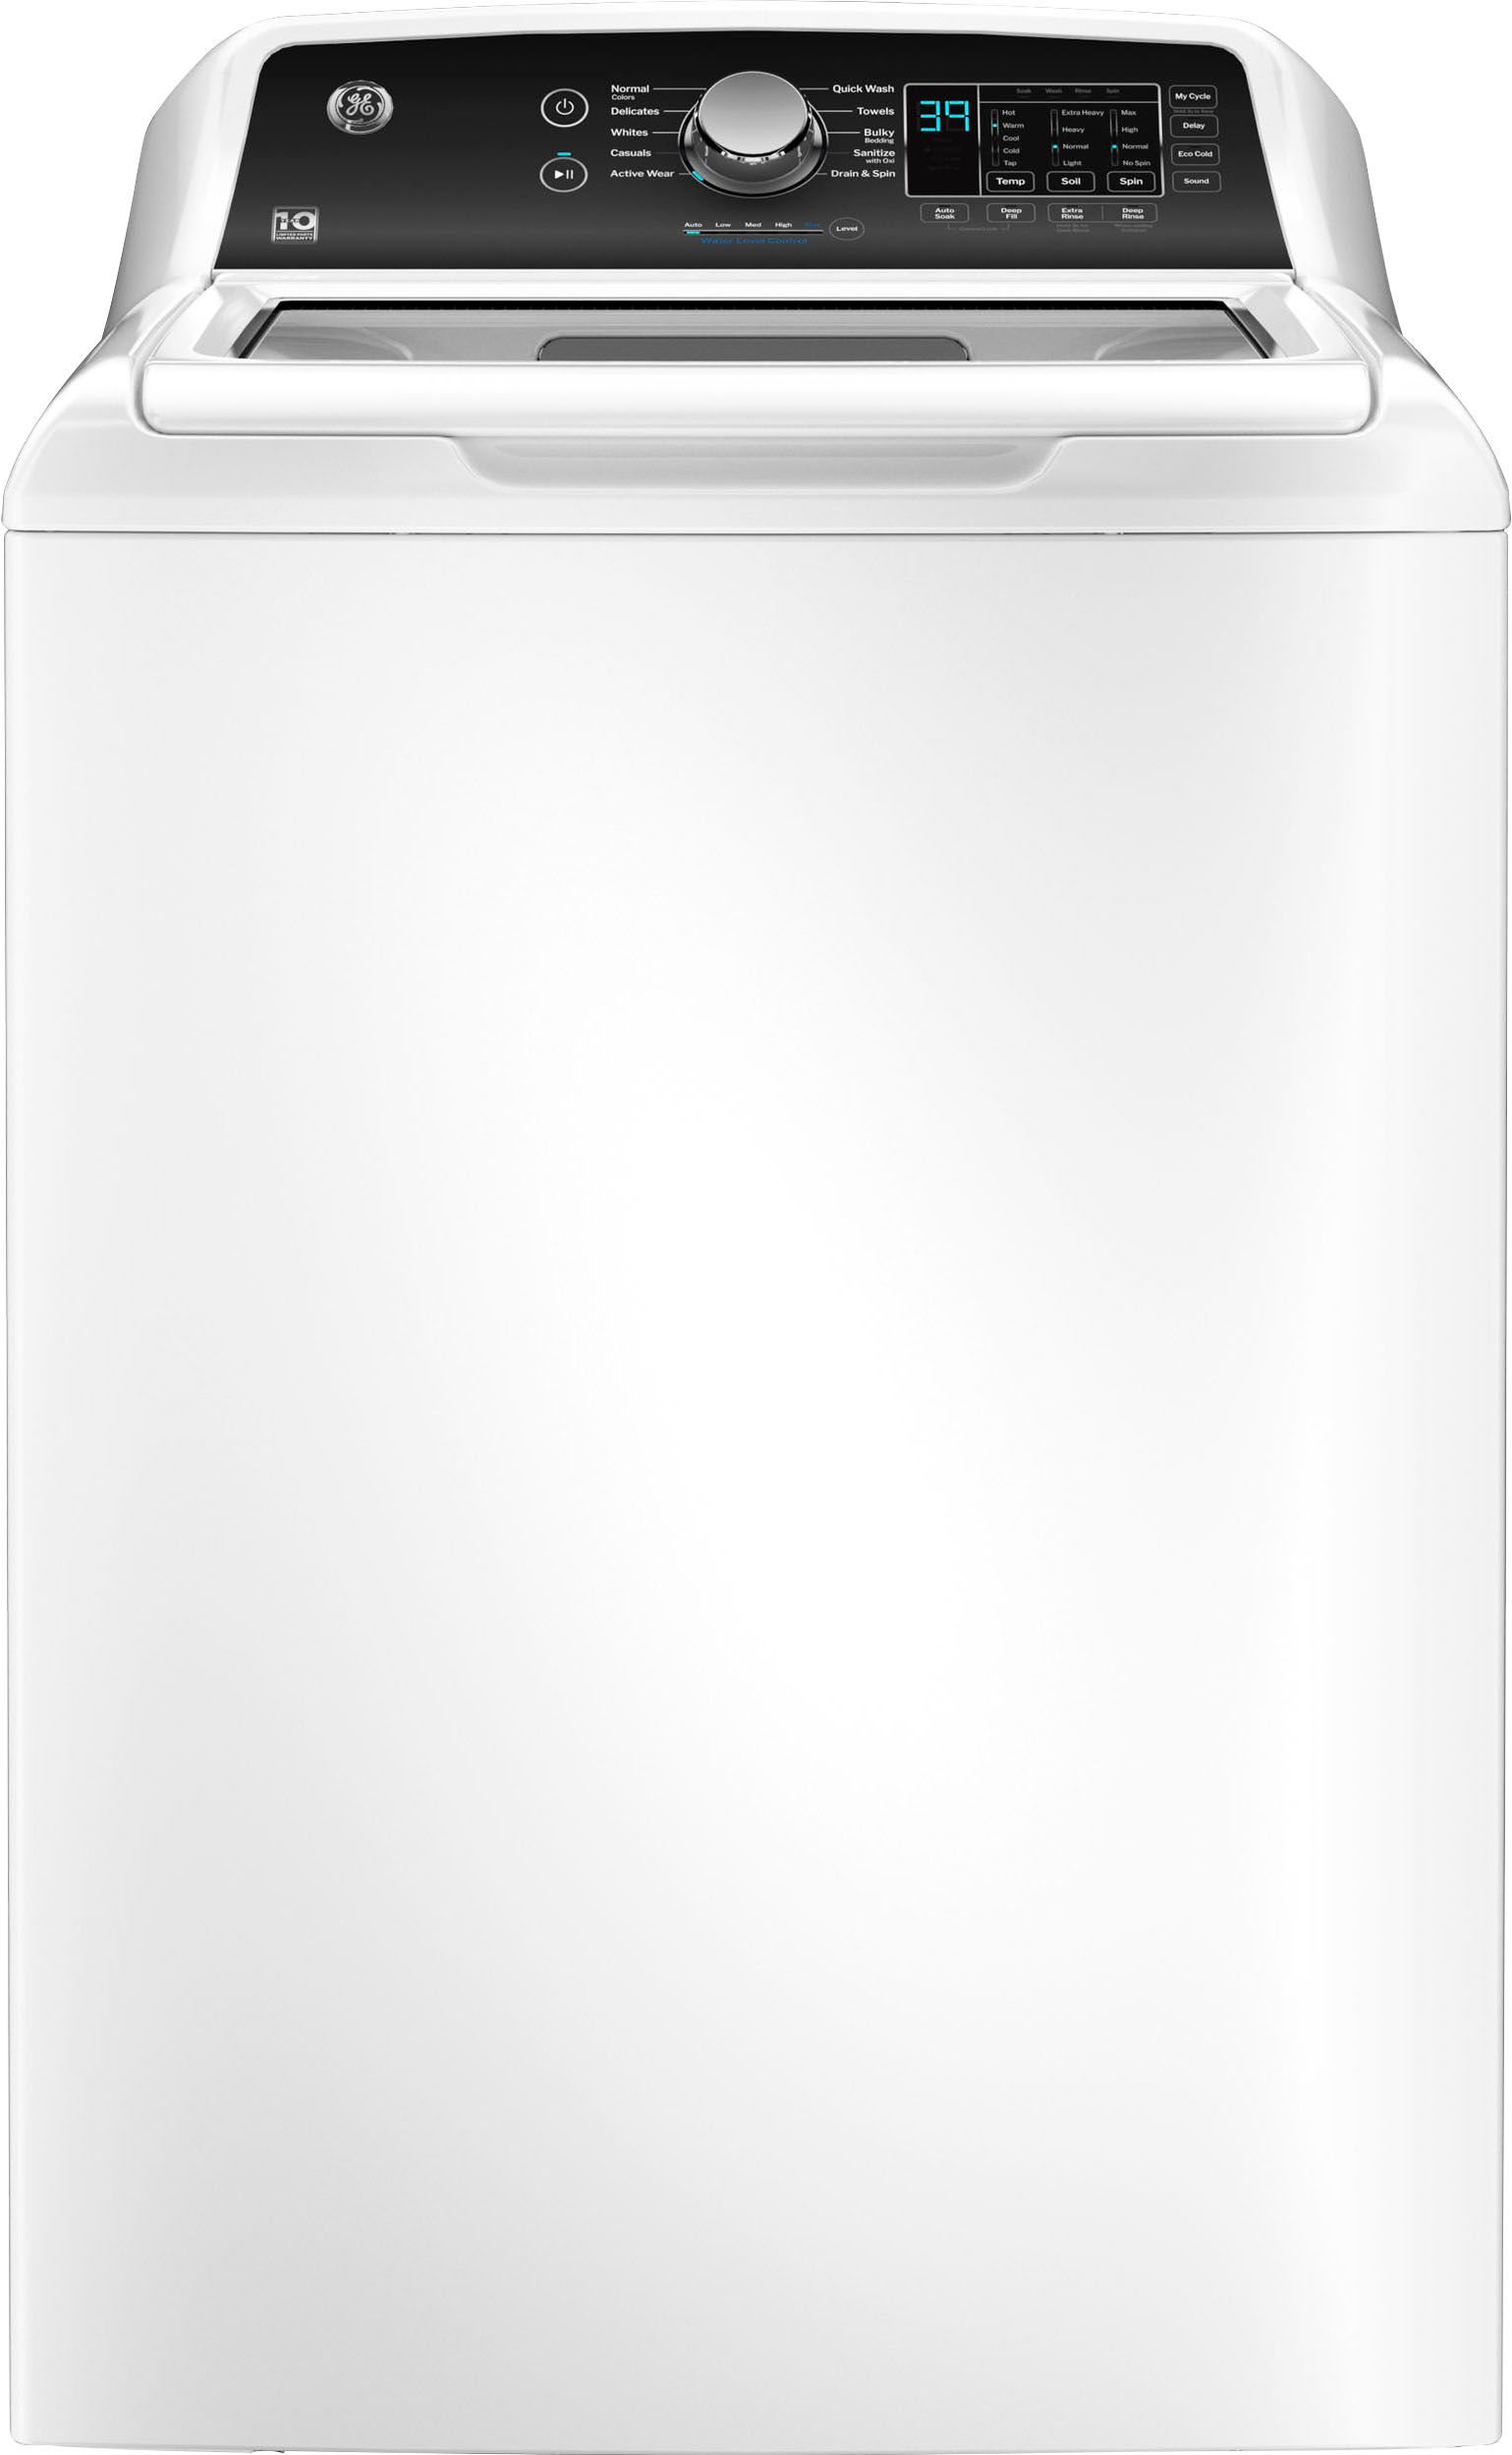 How Much Water Does a Washing Machine Use? [Gallon per Load]